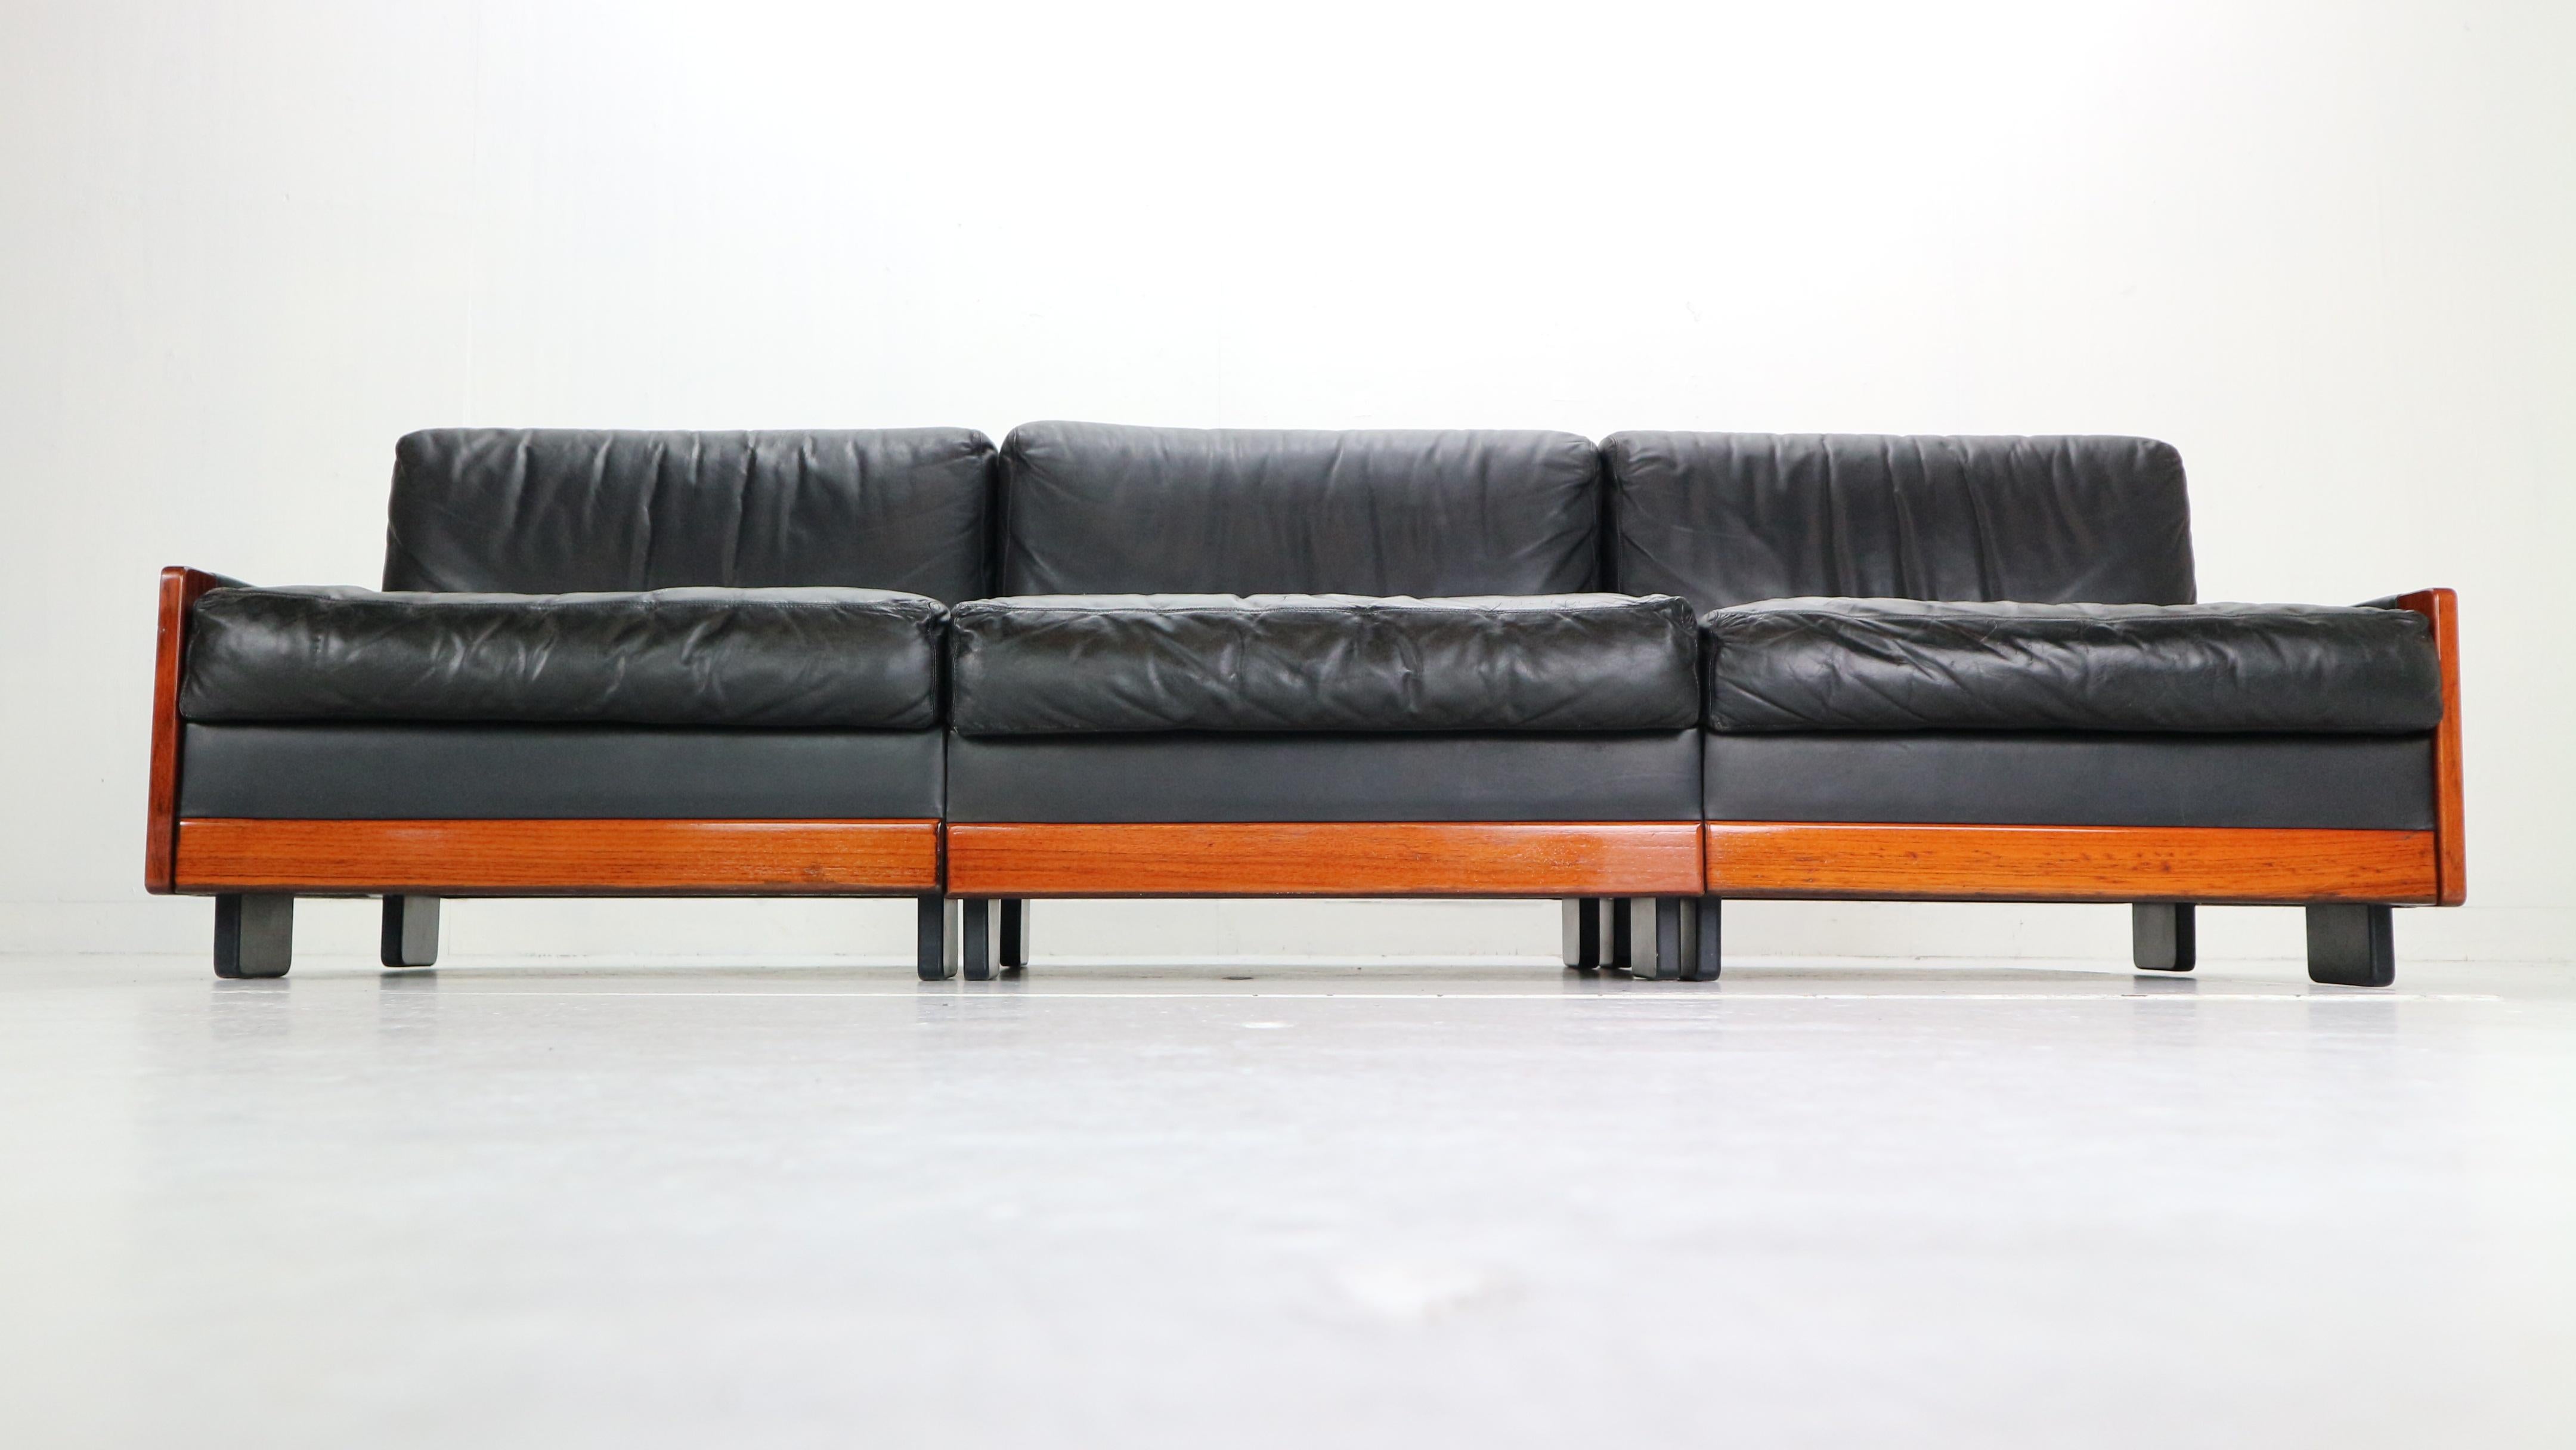 Three-seat sofa was produced by Cassina in 1960s and designed by Afra and Tobia Scarpa.
Mid-Century Modern period Italian design item.
Rosewood frame with a high quality black leather covering the sides, back, seating and back cushions. Has some